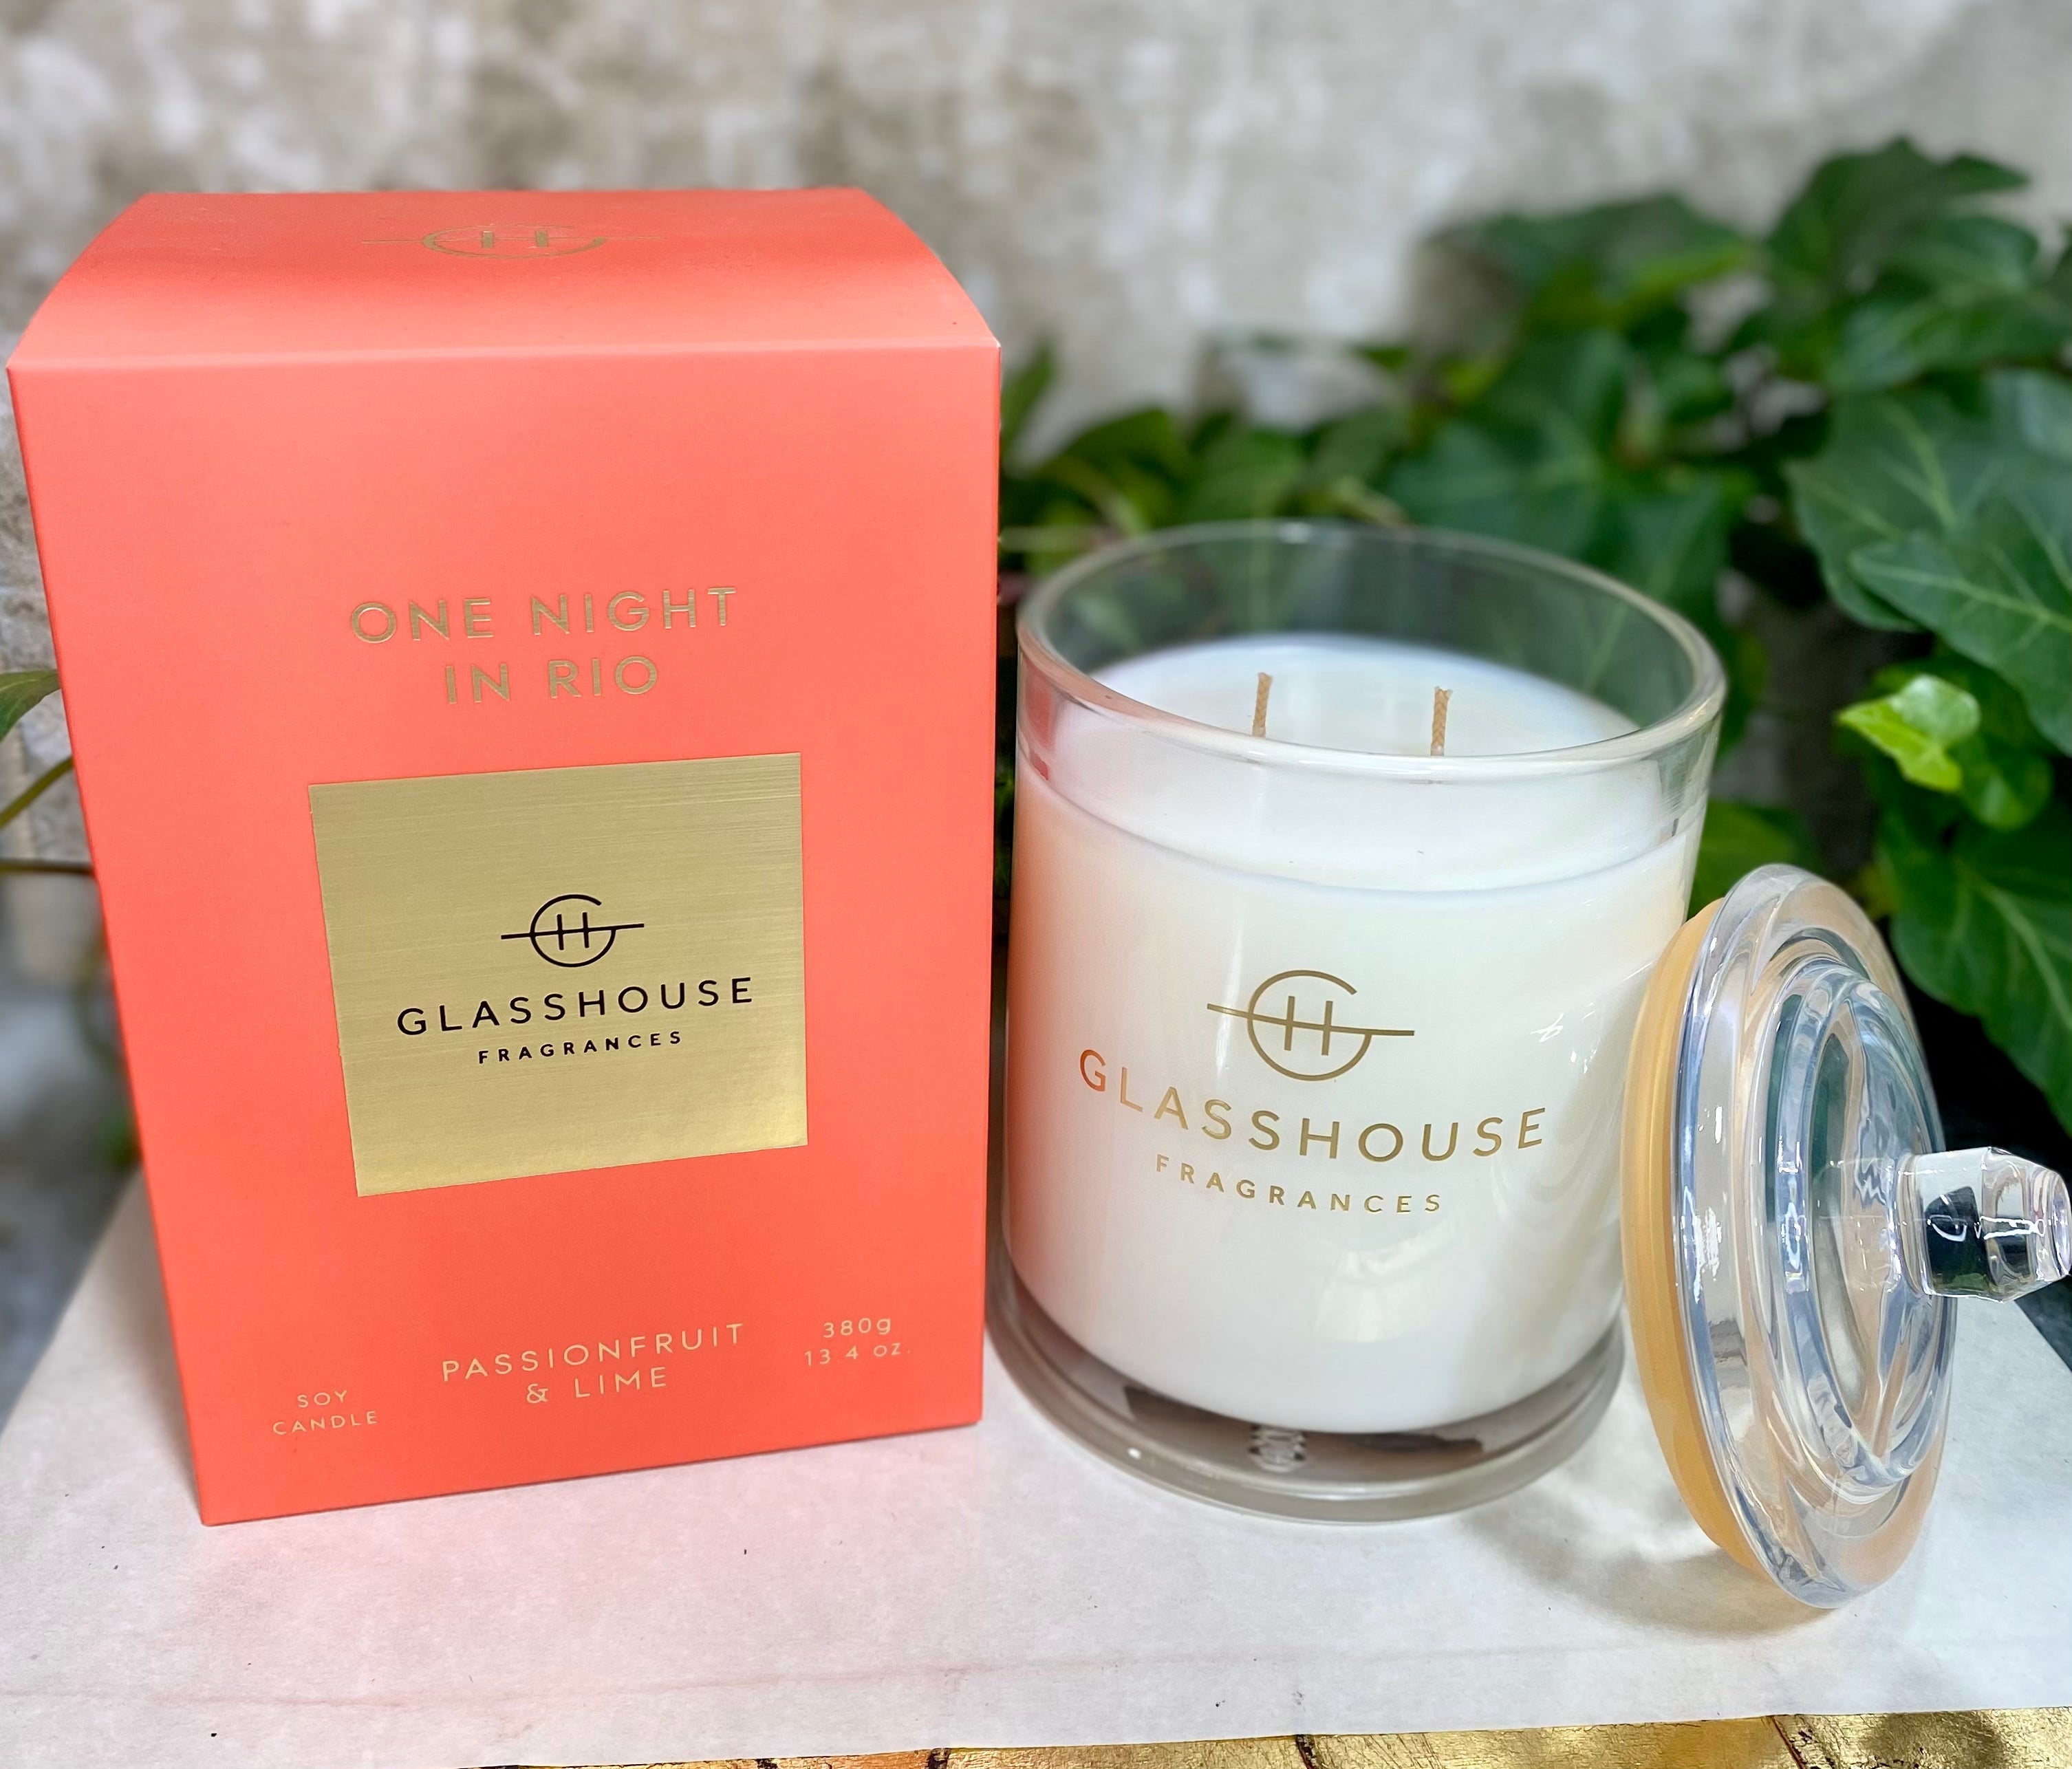 Glasshouse “One Night in Rio” candle 13.4 oz.